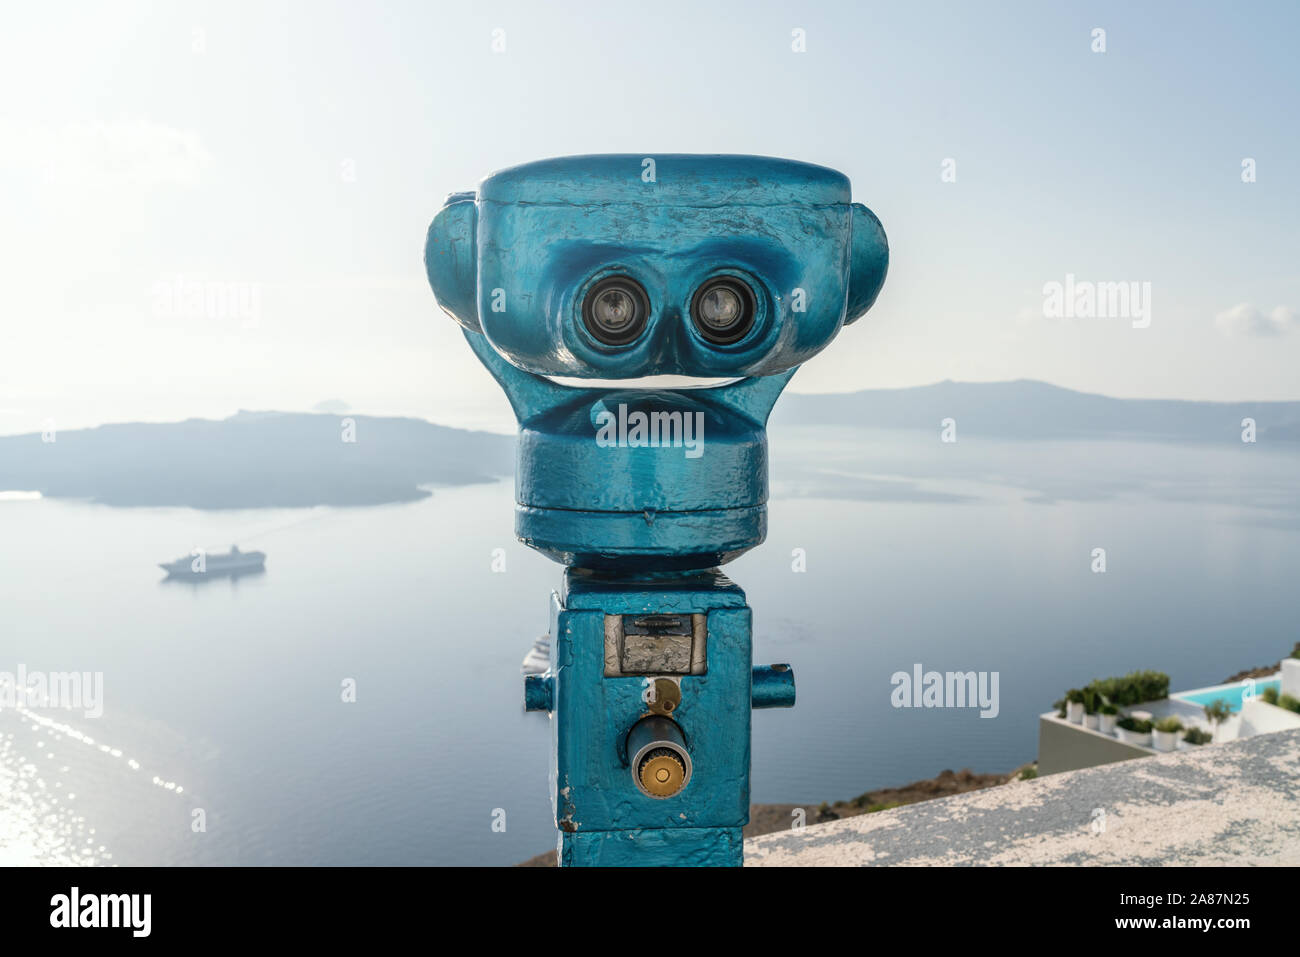 Old coin-operated binoculars in Fira, the capital town of Santorini overviewing the Agean Sea. Stock Photo